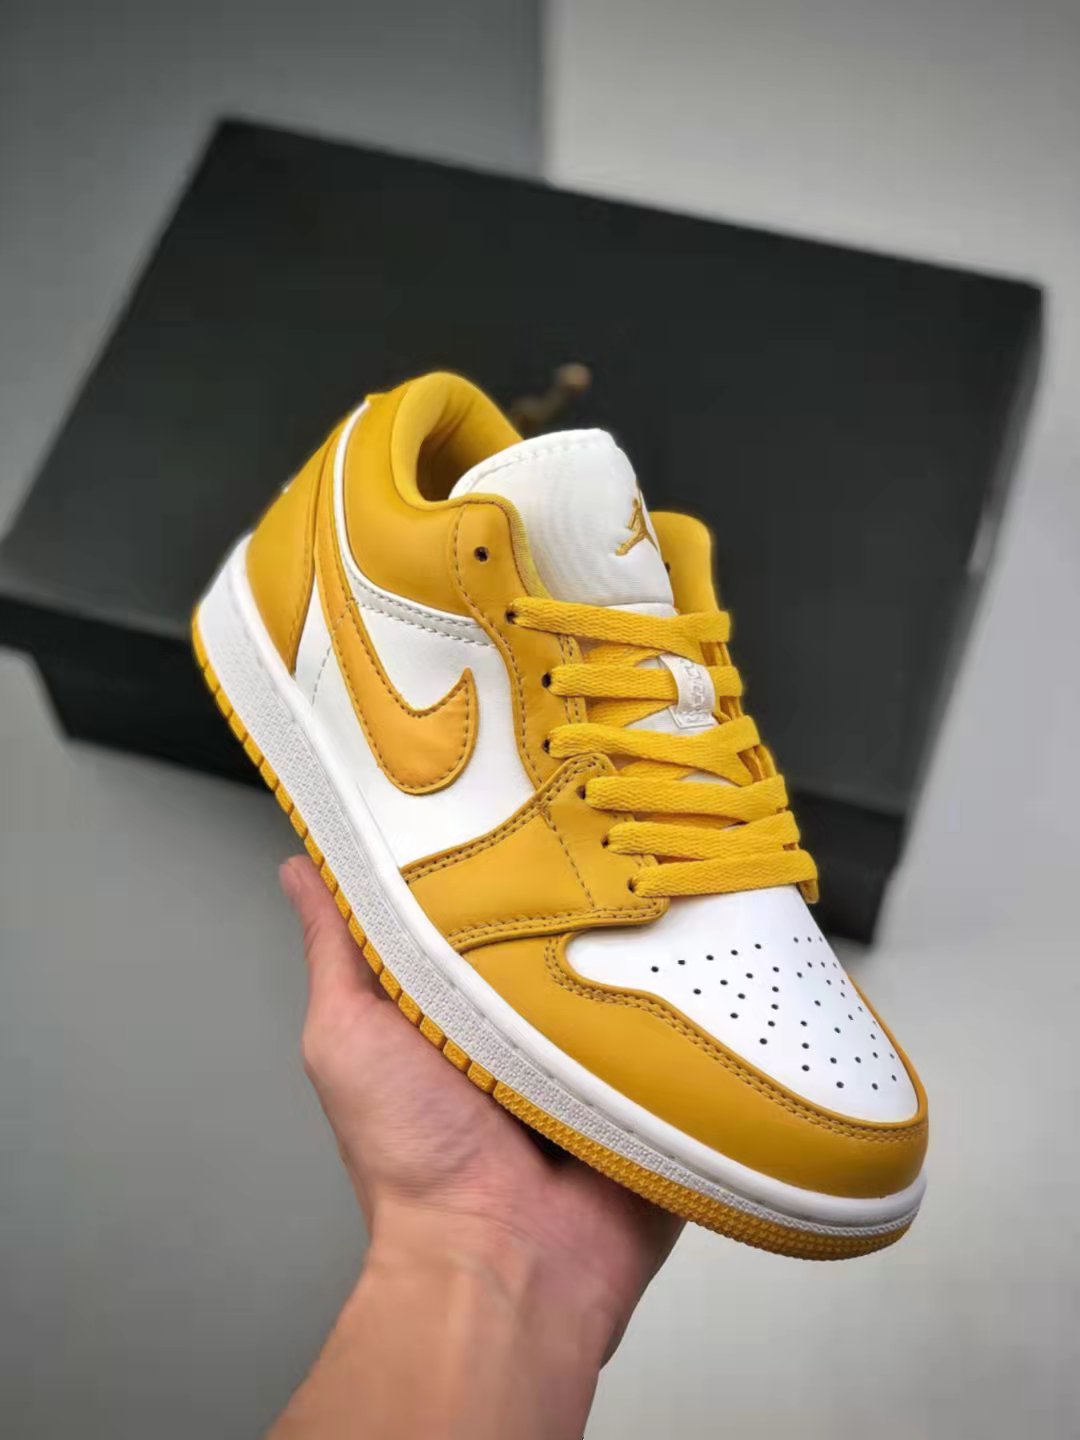 Air Jordan 1 Low 'Pollen' 553558-171: Iconic Sneaker with Vibrant Yellow Aesthetic for Sale